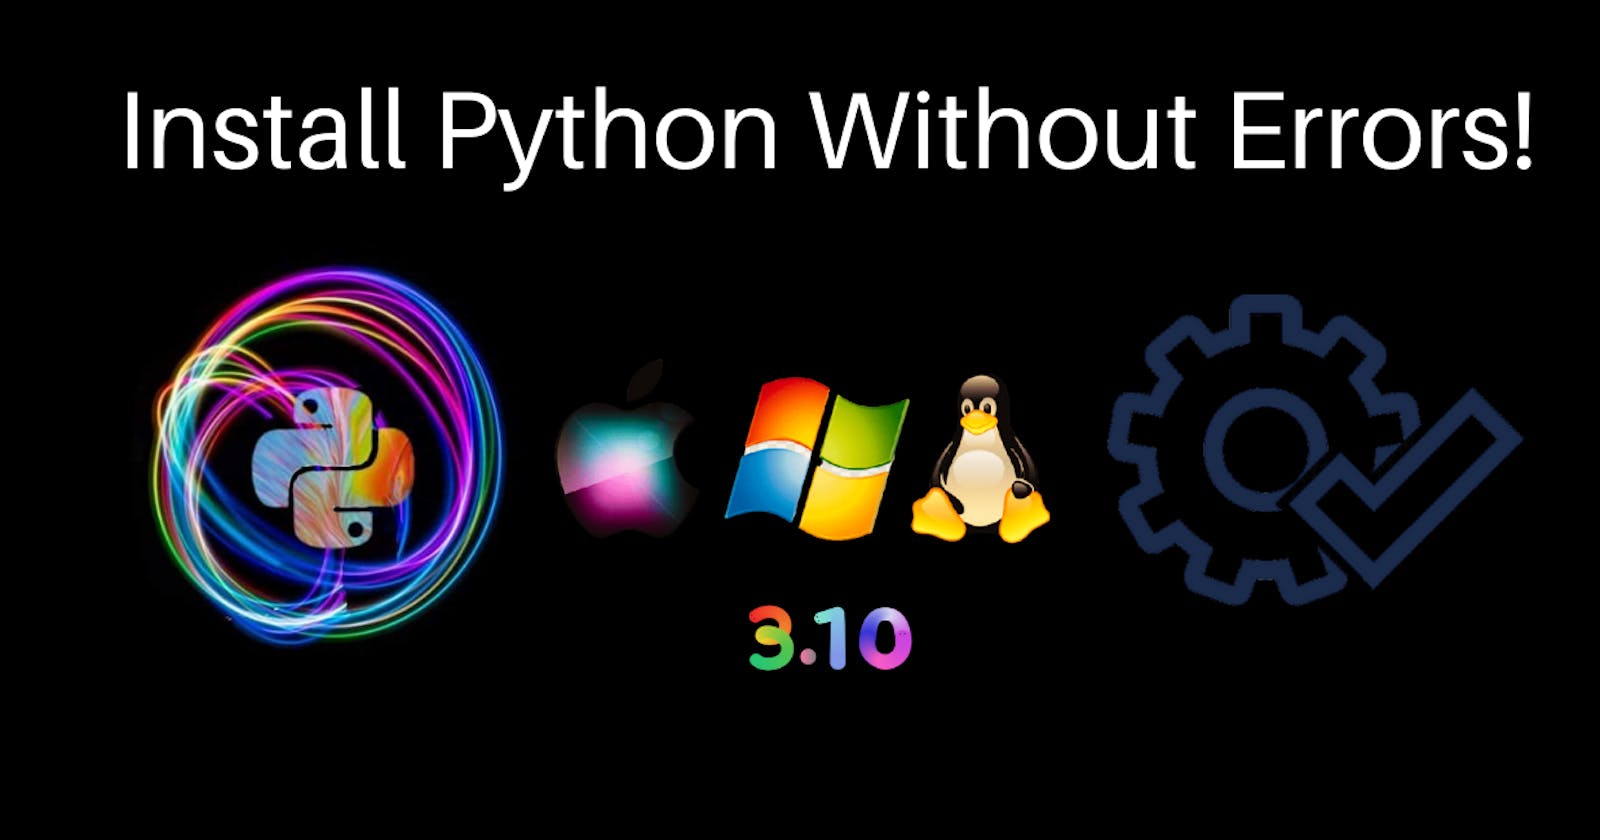 Install Python Without Errors